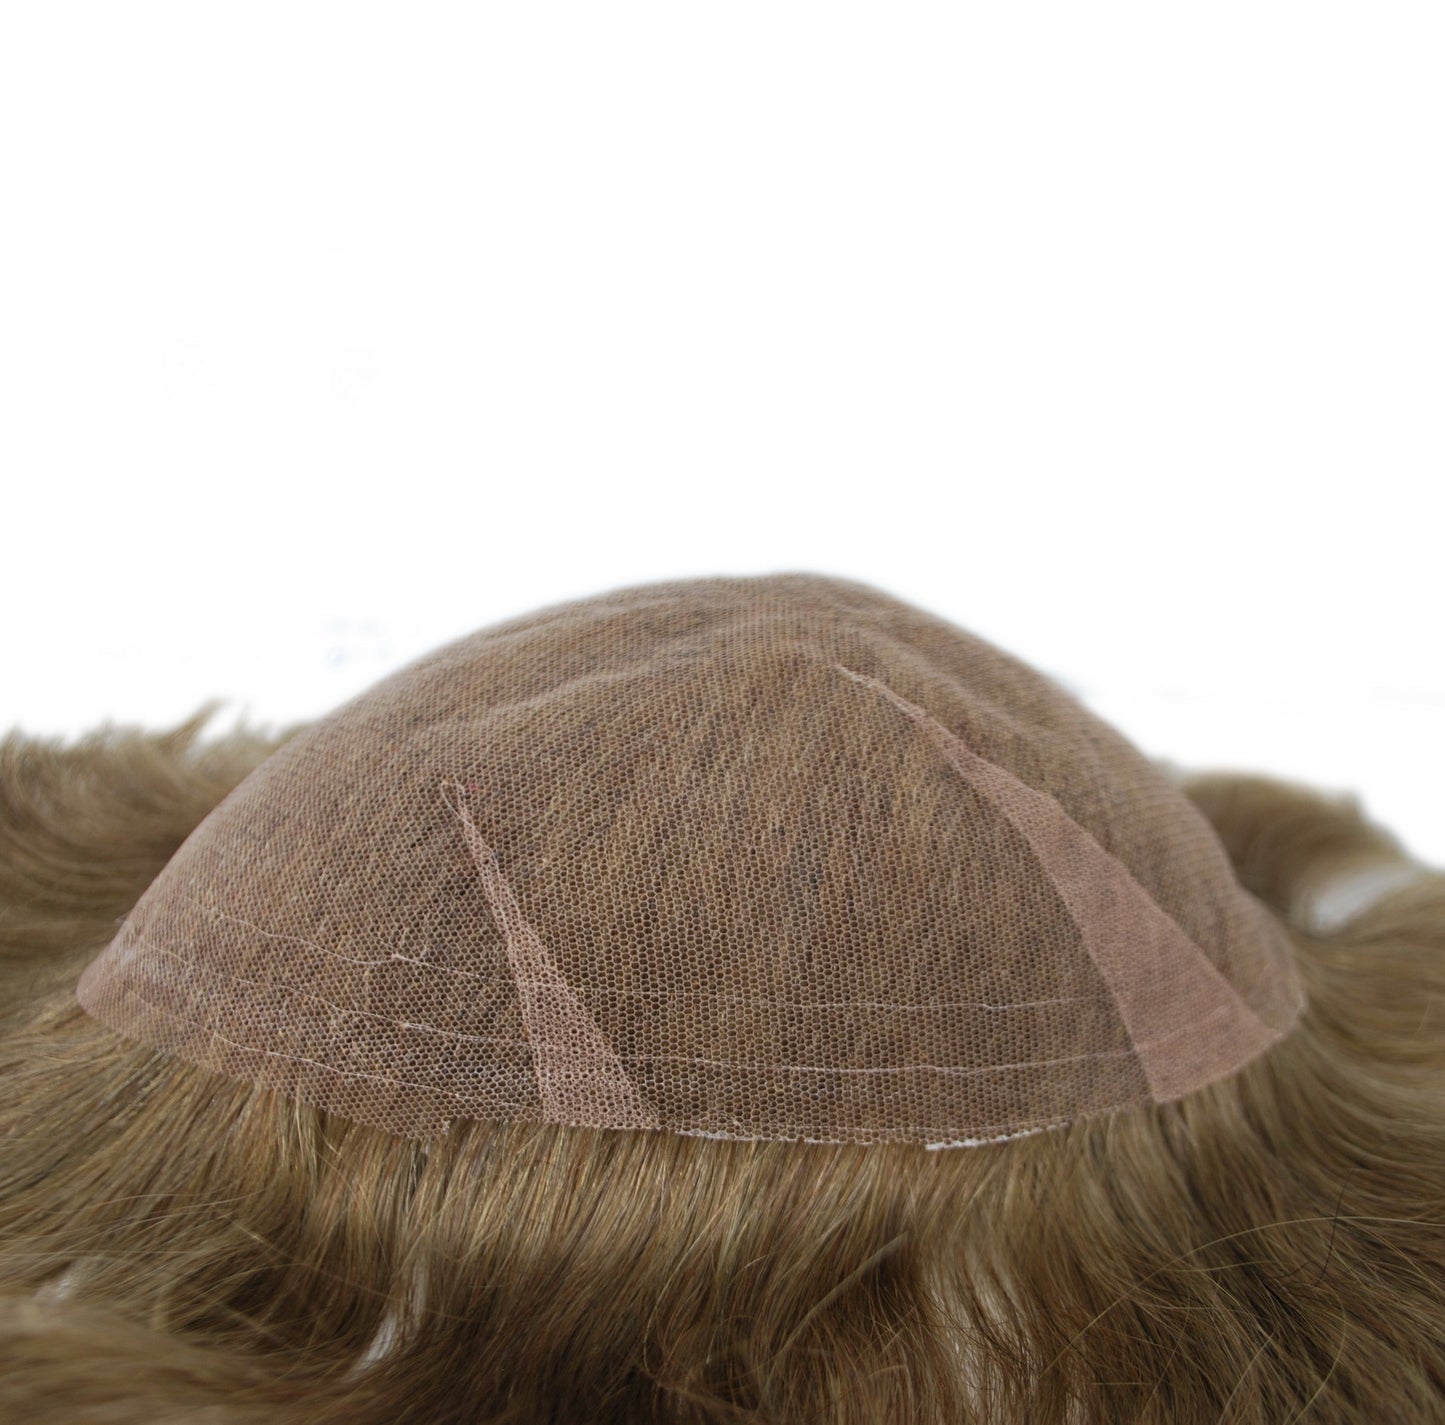 #5 Light Brown All Swiss Lace Toupee for Men Bleached Knots Human Hair Replacement Systems